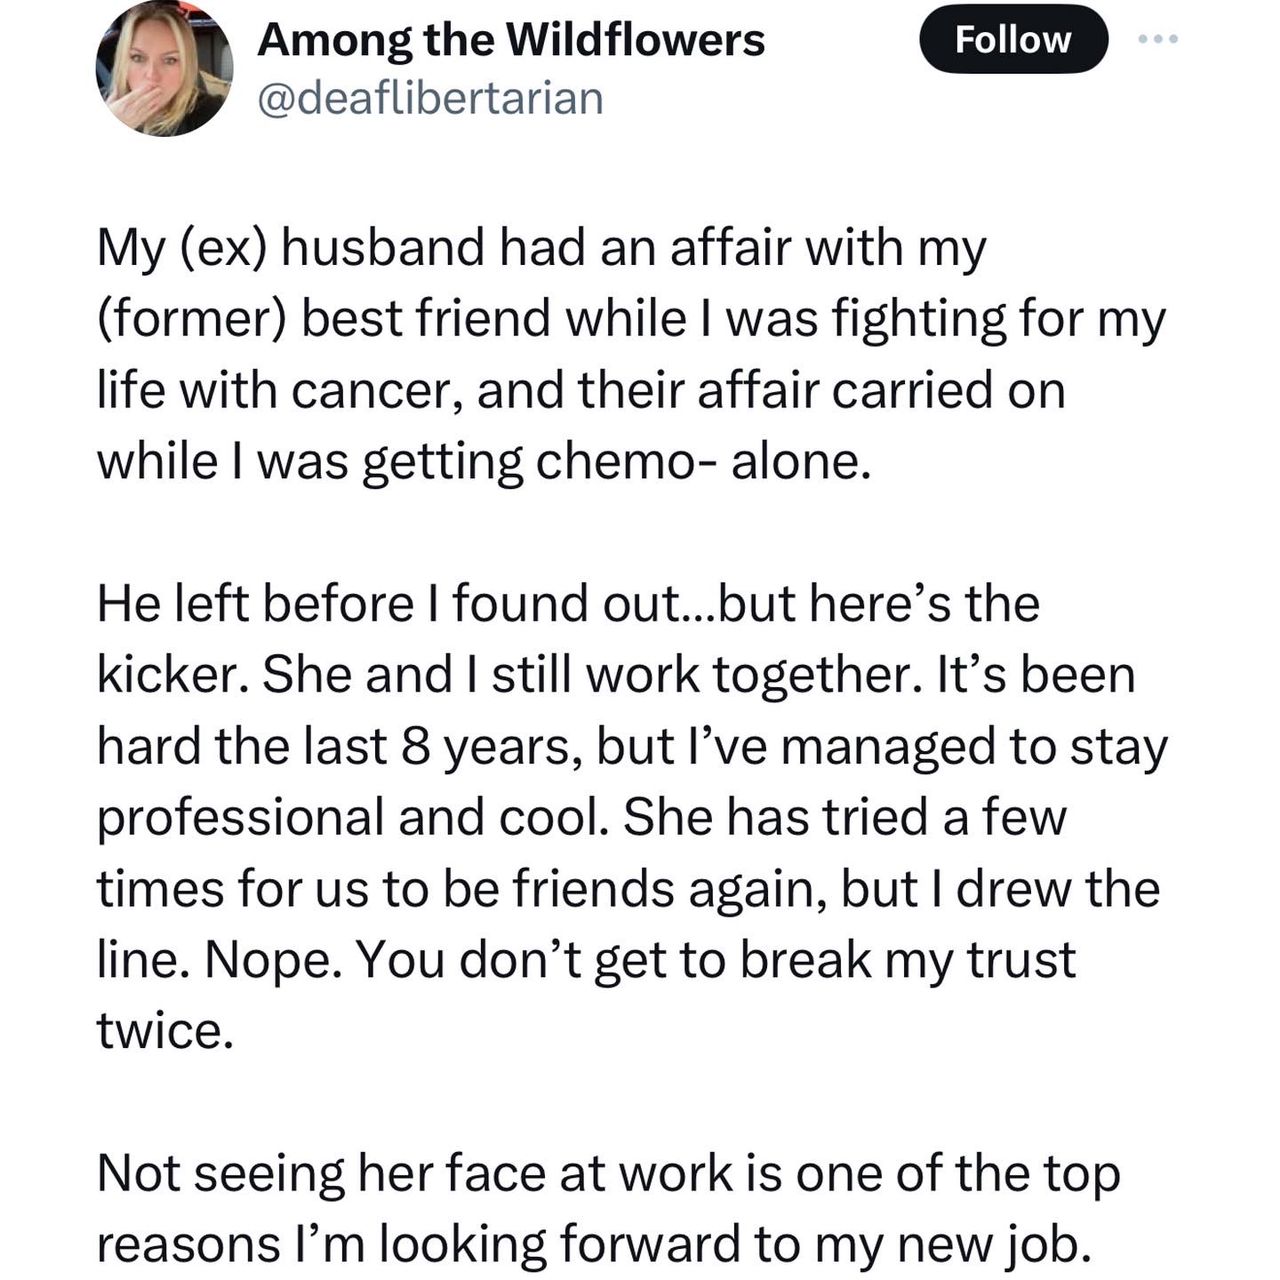 Lady recounts how her husband had an affair with her bestfriend while she battled with cancer